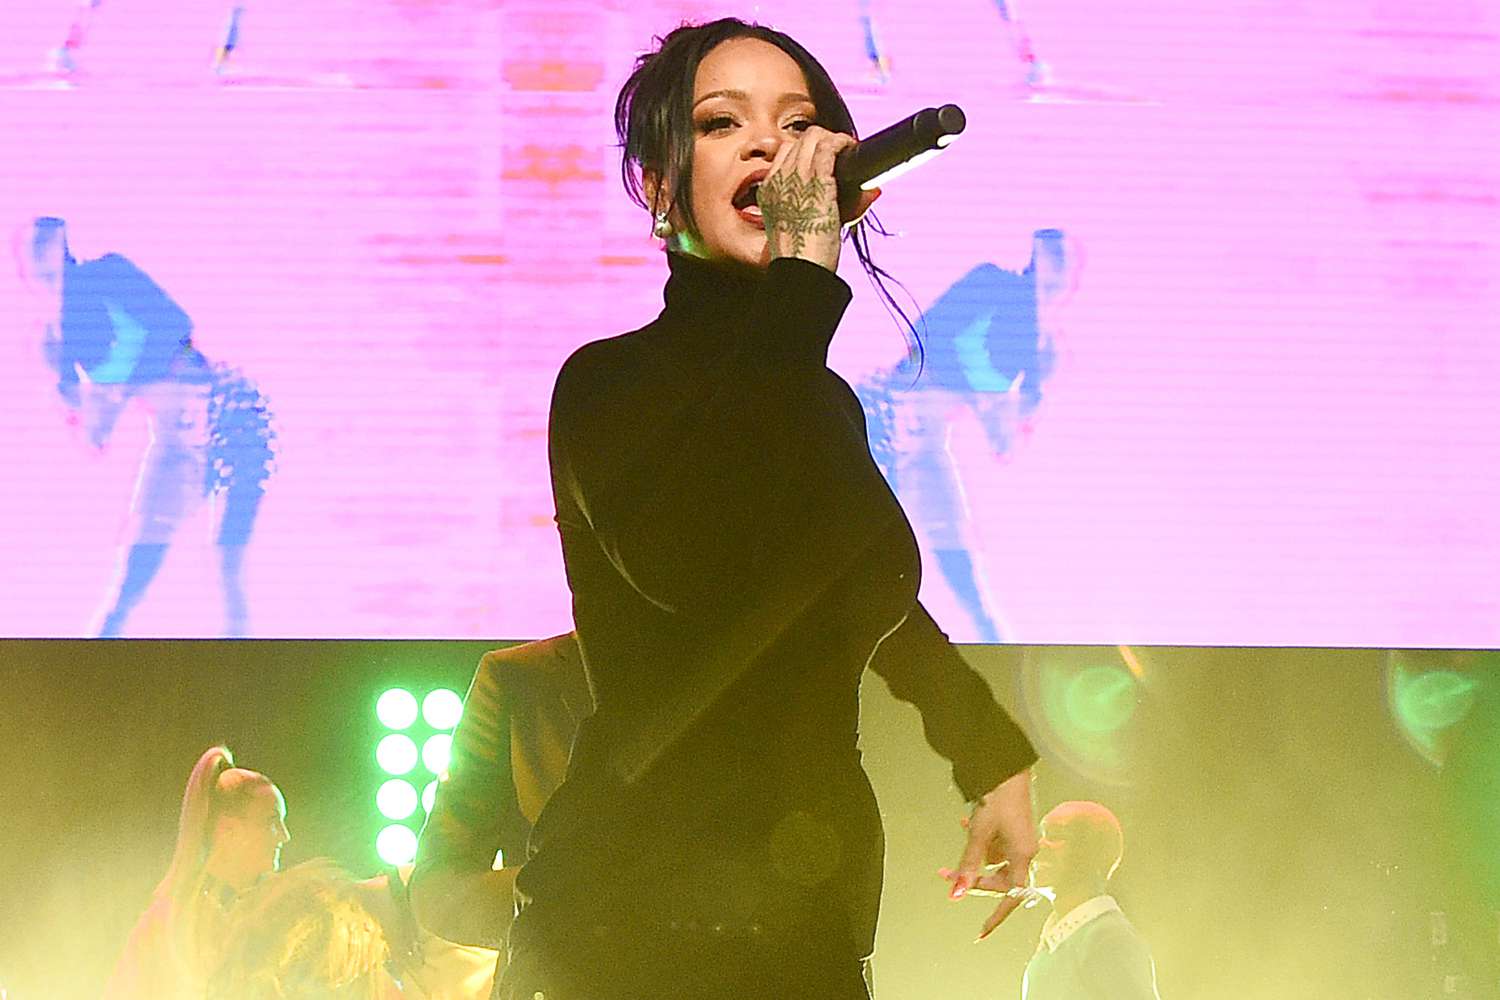 Rihanna performs onstage during Rihanna's 5th Annual Diamond Ball Benefitting The Clara Lionel Foundation at Cipriani Wall Street on September 12, 2019 in New York City.